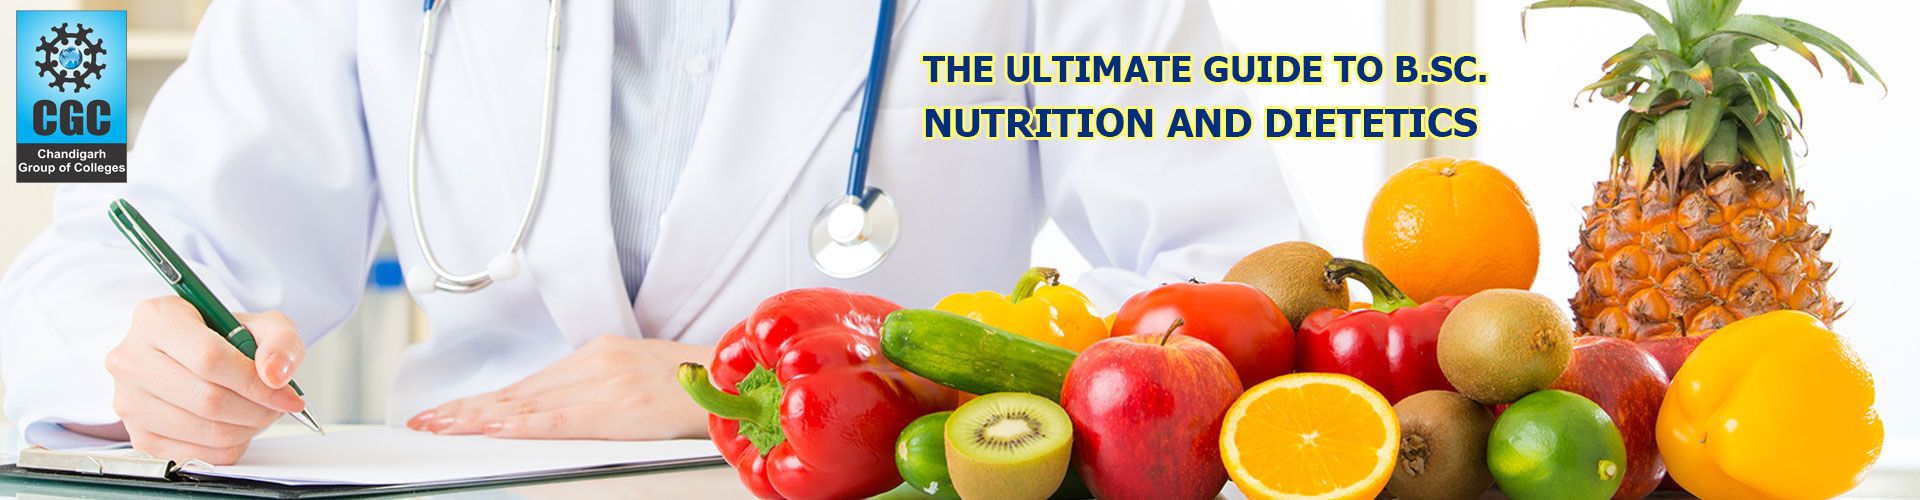 The Ultimate Guide to B.Sc. Nutrition and Dietetics 